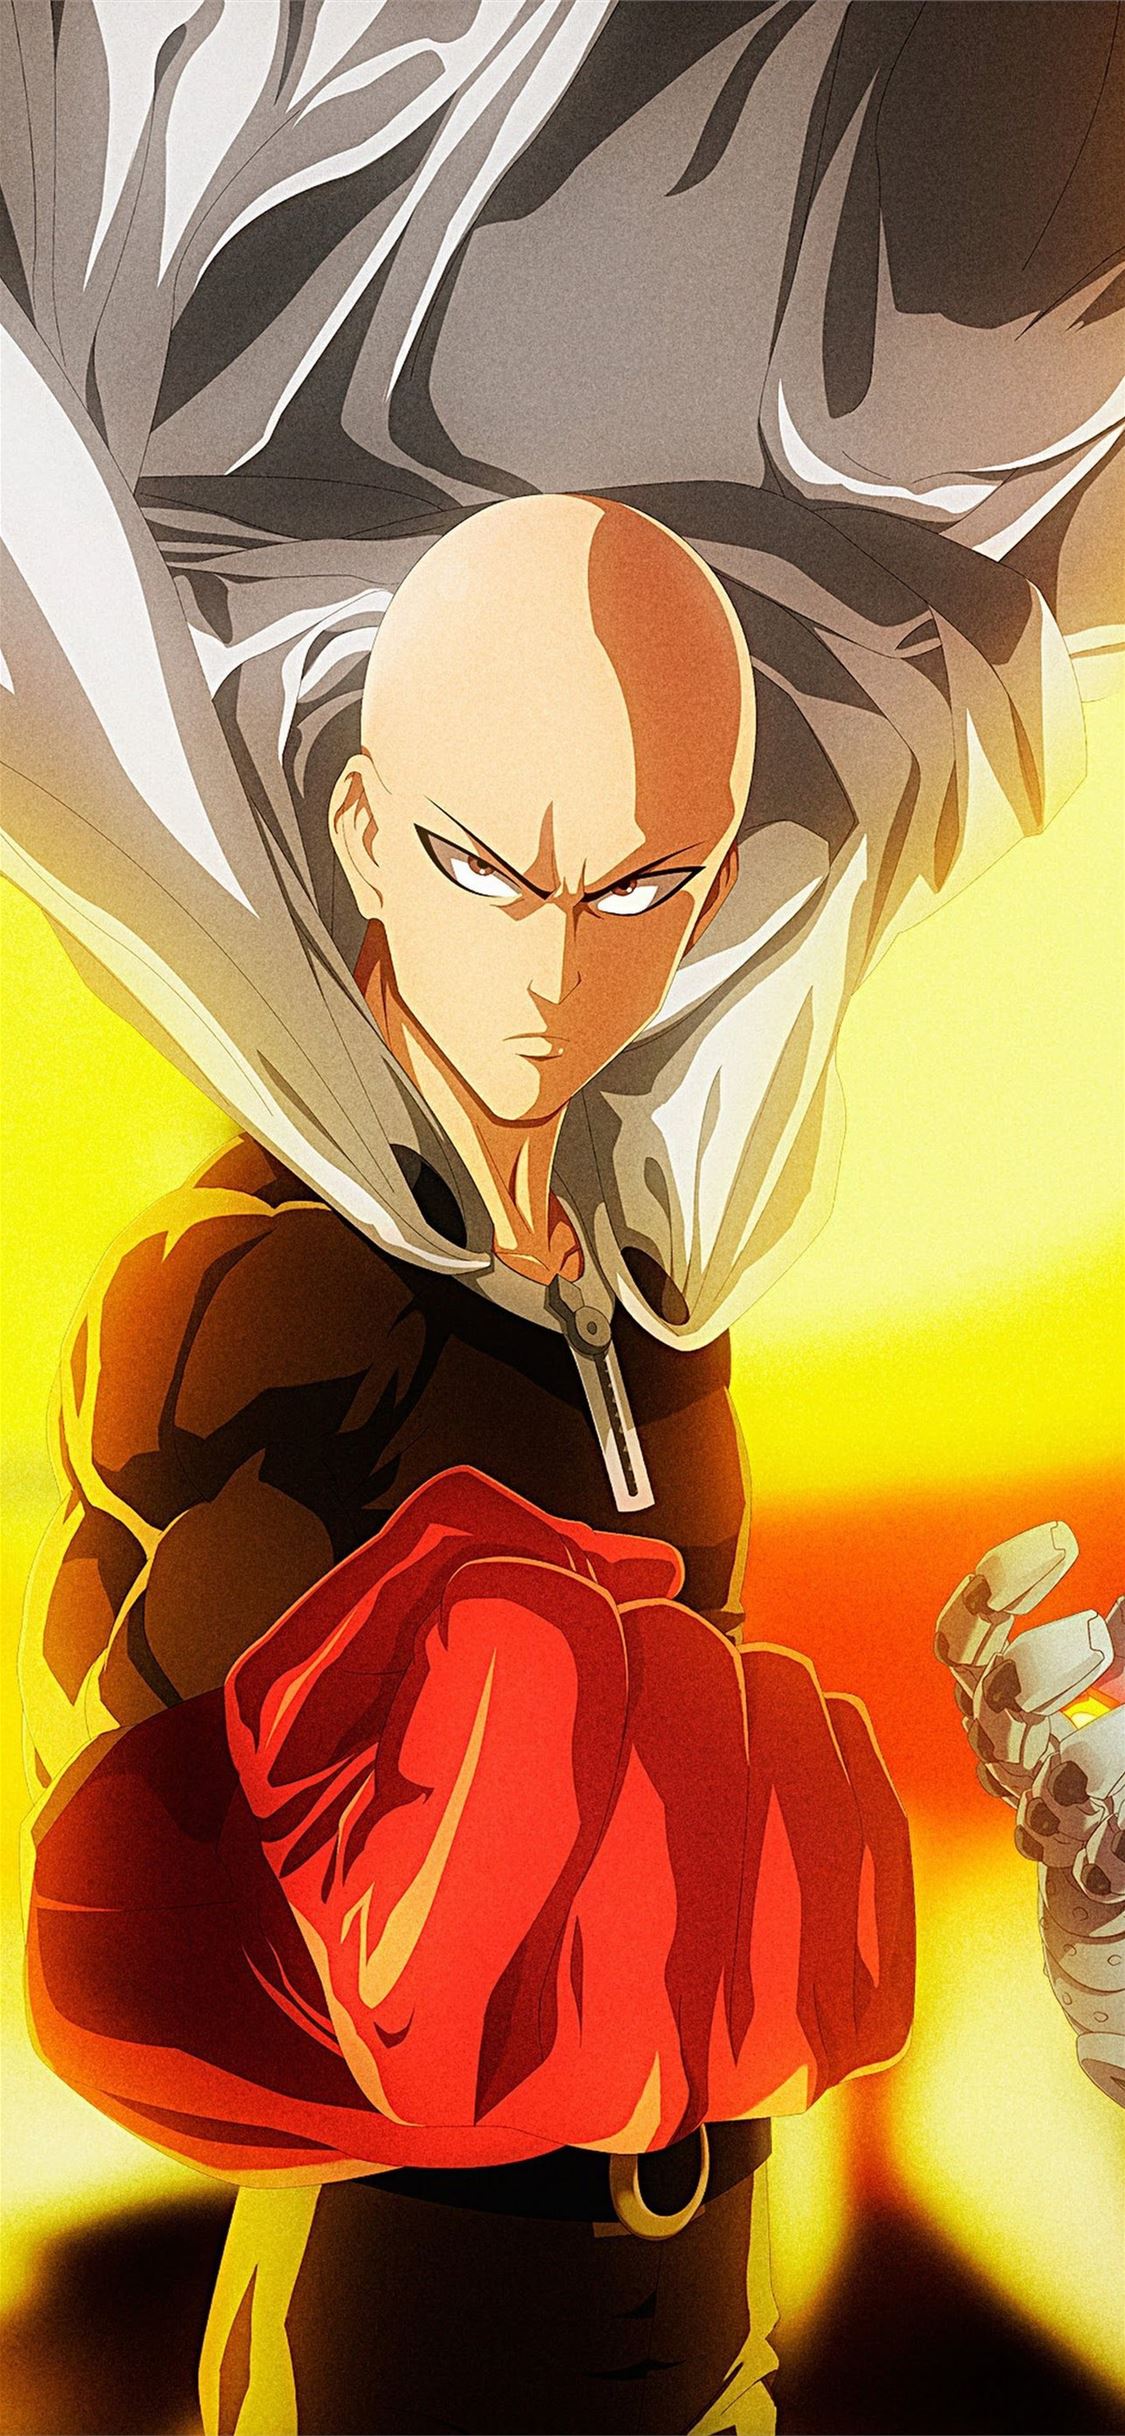 500 One Punch Man Phone Wallpapers  Background Beautiful Best Available  For Download One Punch Man Phone Images Free On Zicxacomphotos  Zicxa  Photos